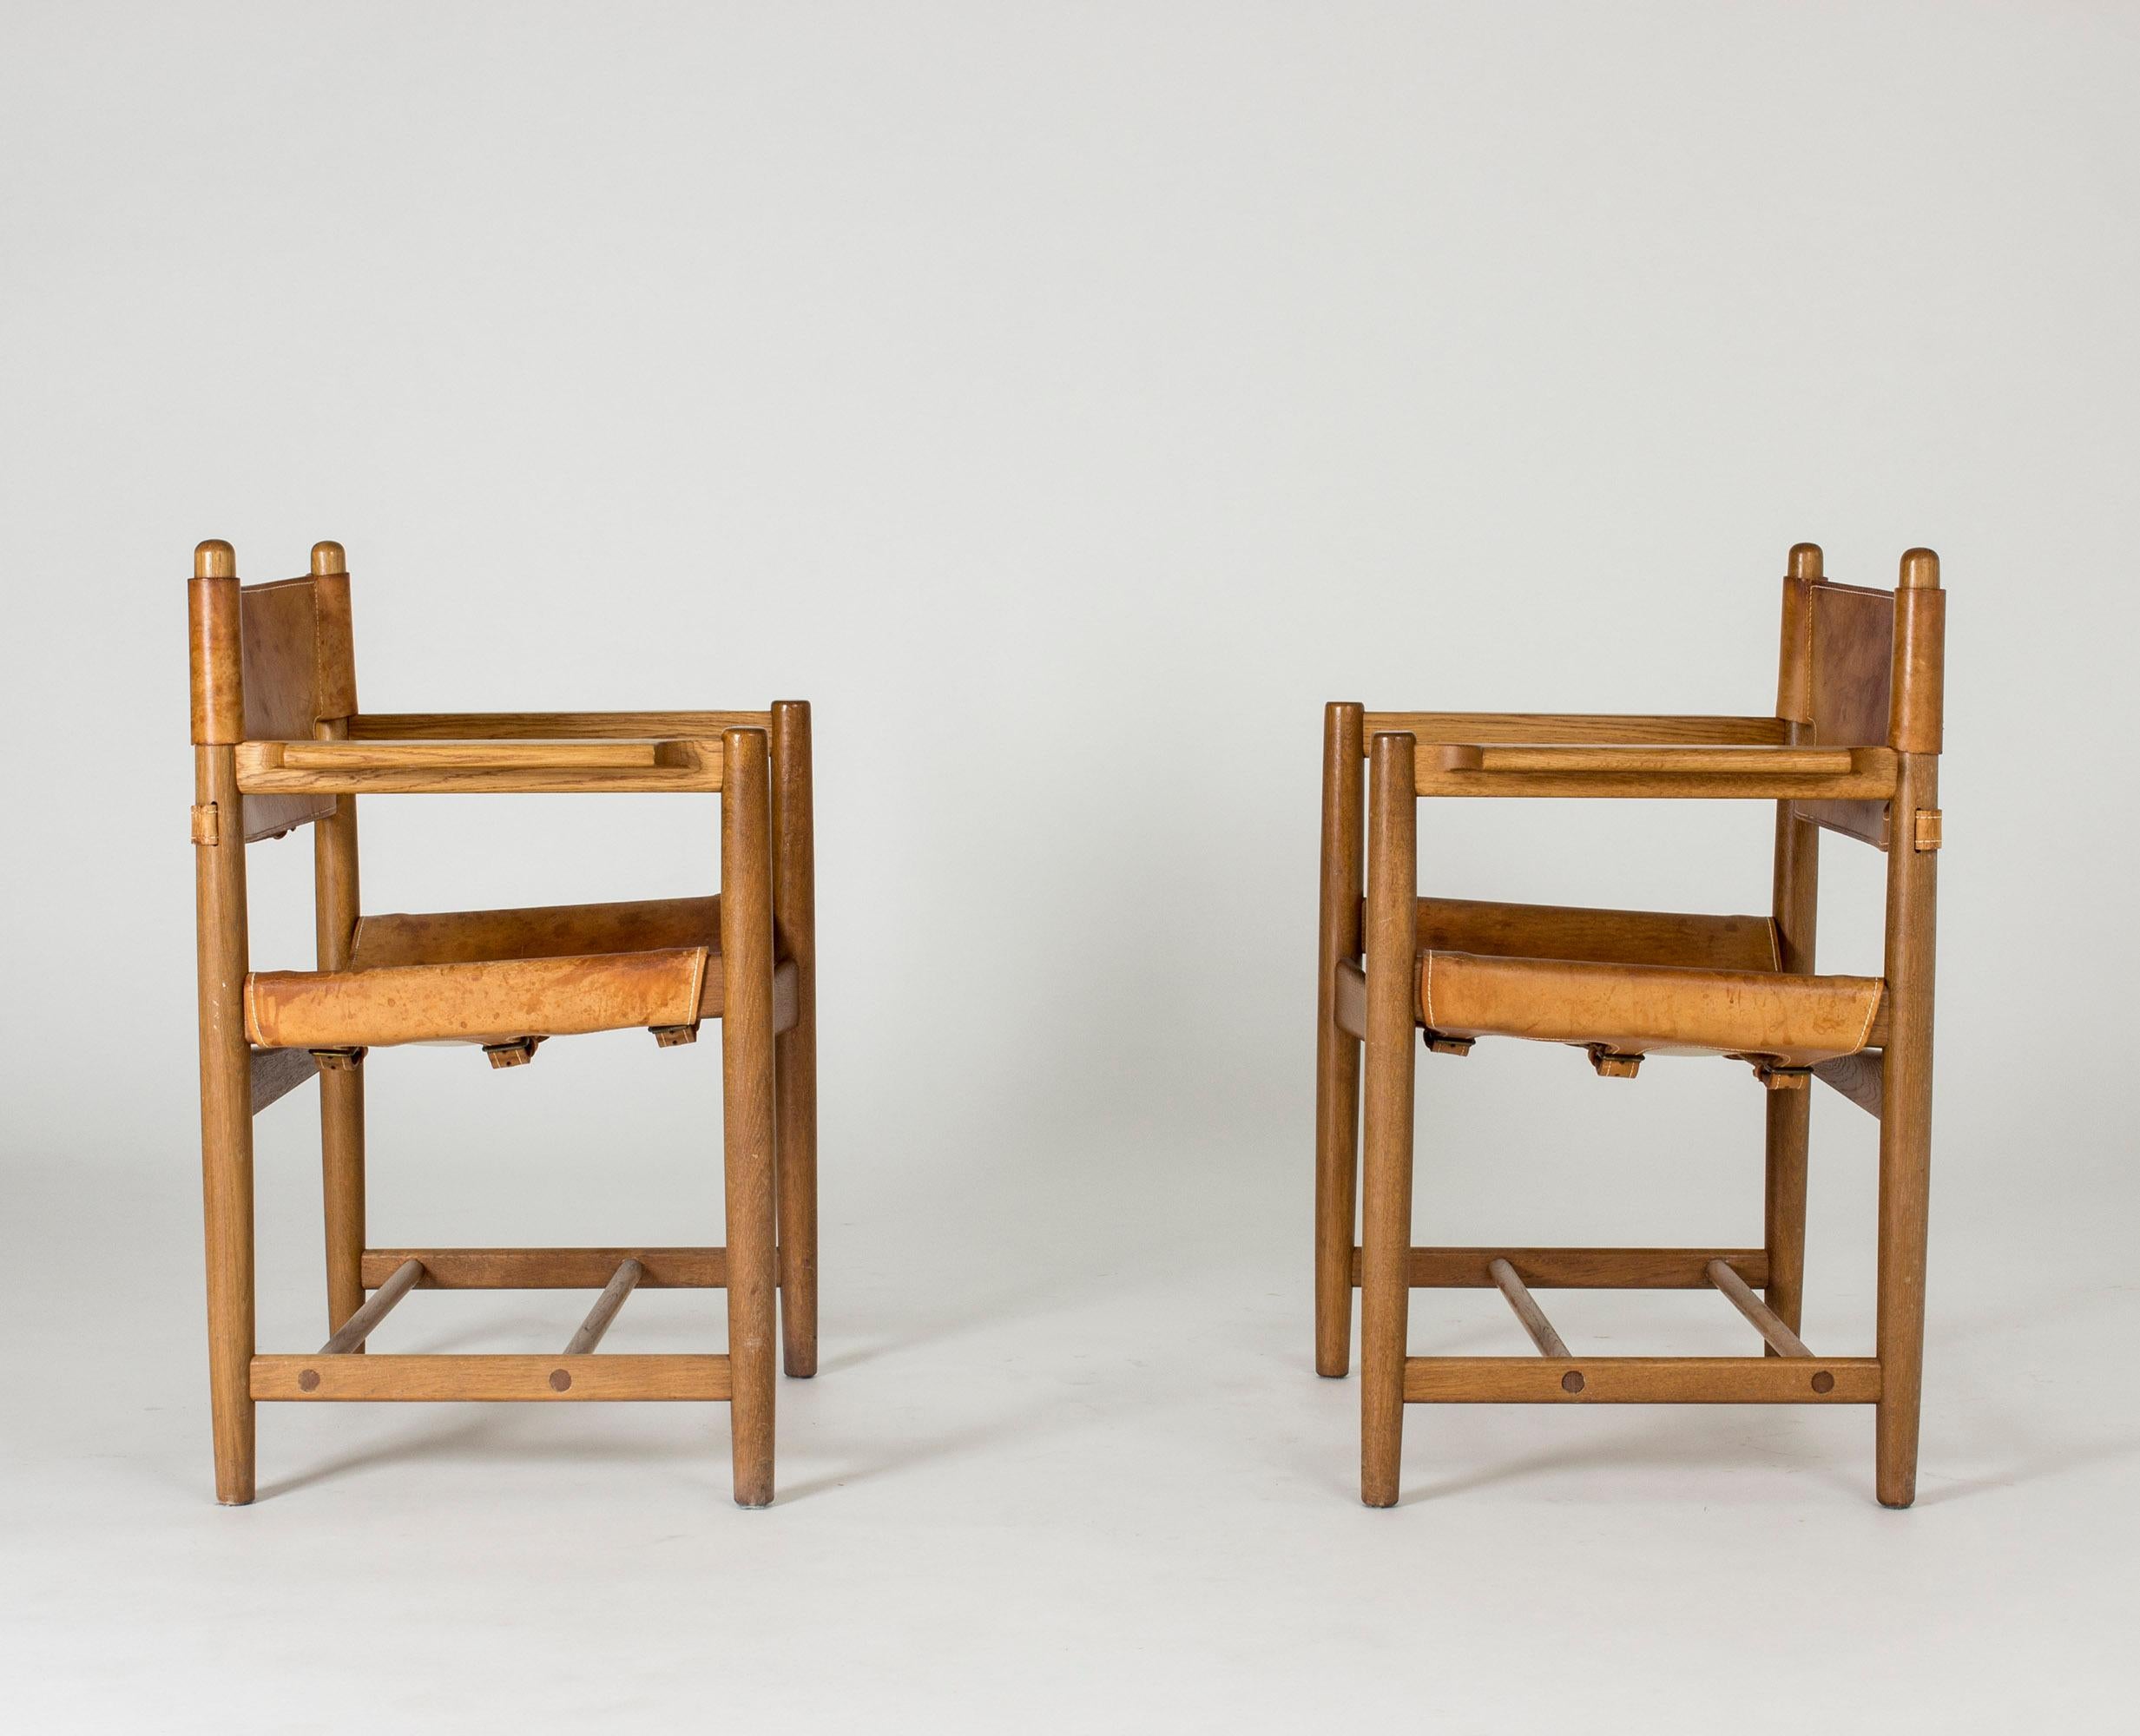 Pair of hunting chairs, model 3238, by Børge Mogensen. Made from oak and leather with accentuated white seams and buckles in the back. A great design, nicely aged.